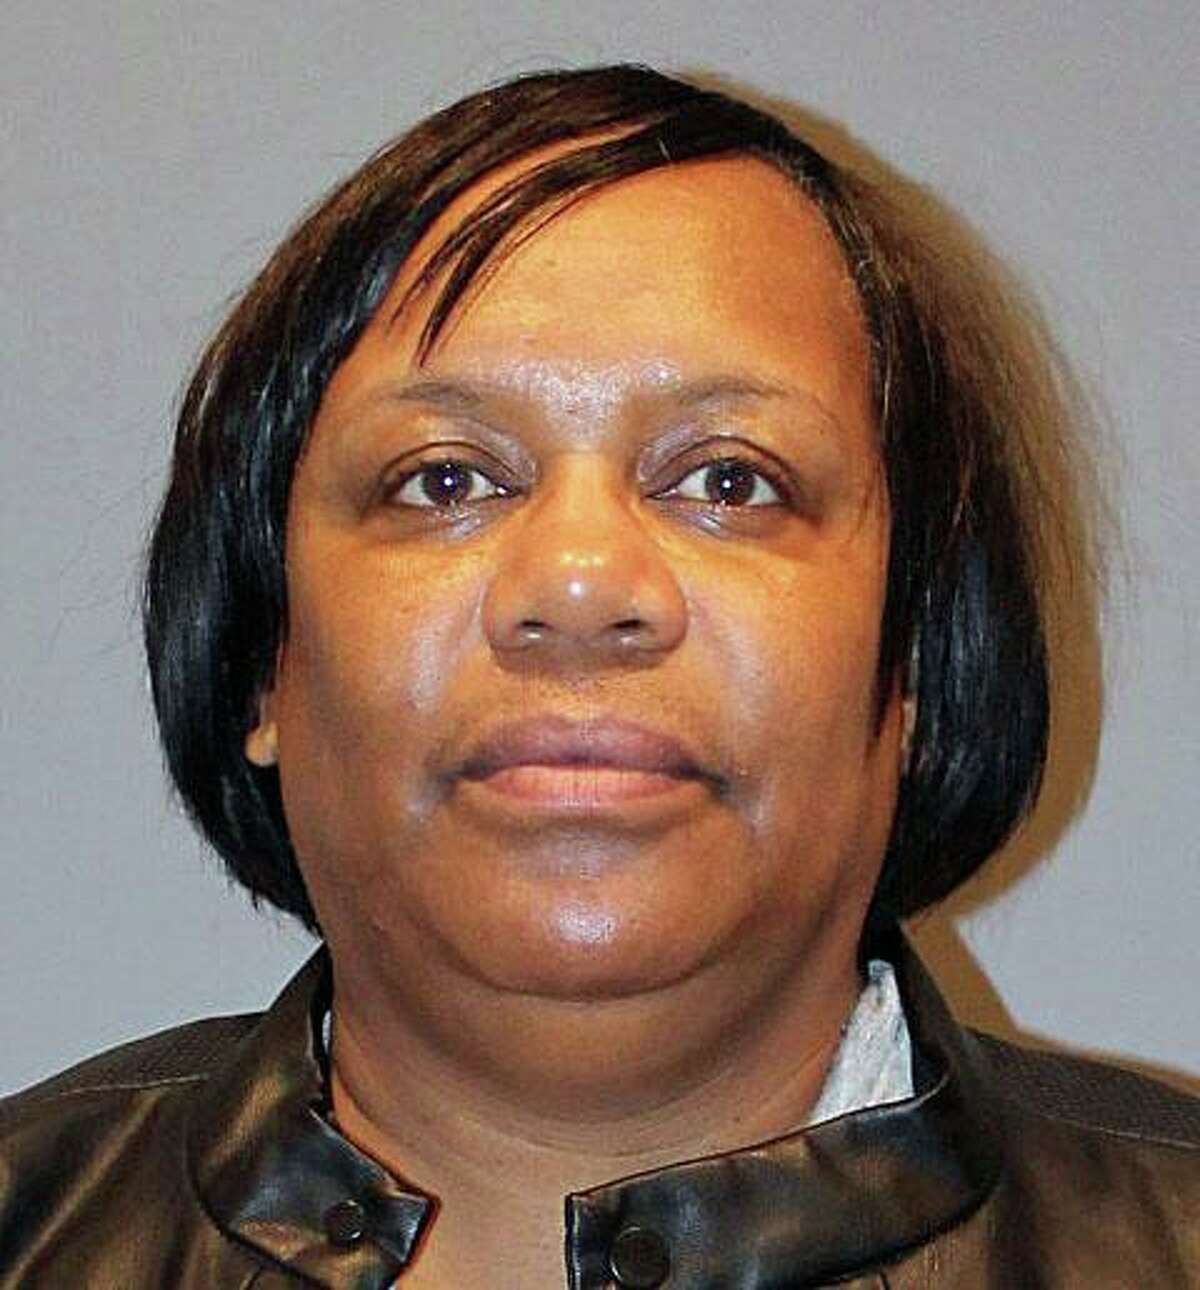 Betty Chappell, of Bridgeport, was charged with second-degree forgery and statement statement in absentee balloting in Stratford in 2018. Chappell was a campaign worker for state Sen. Marilyn Moore’s mayoral primary run in Bridgeport